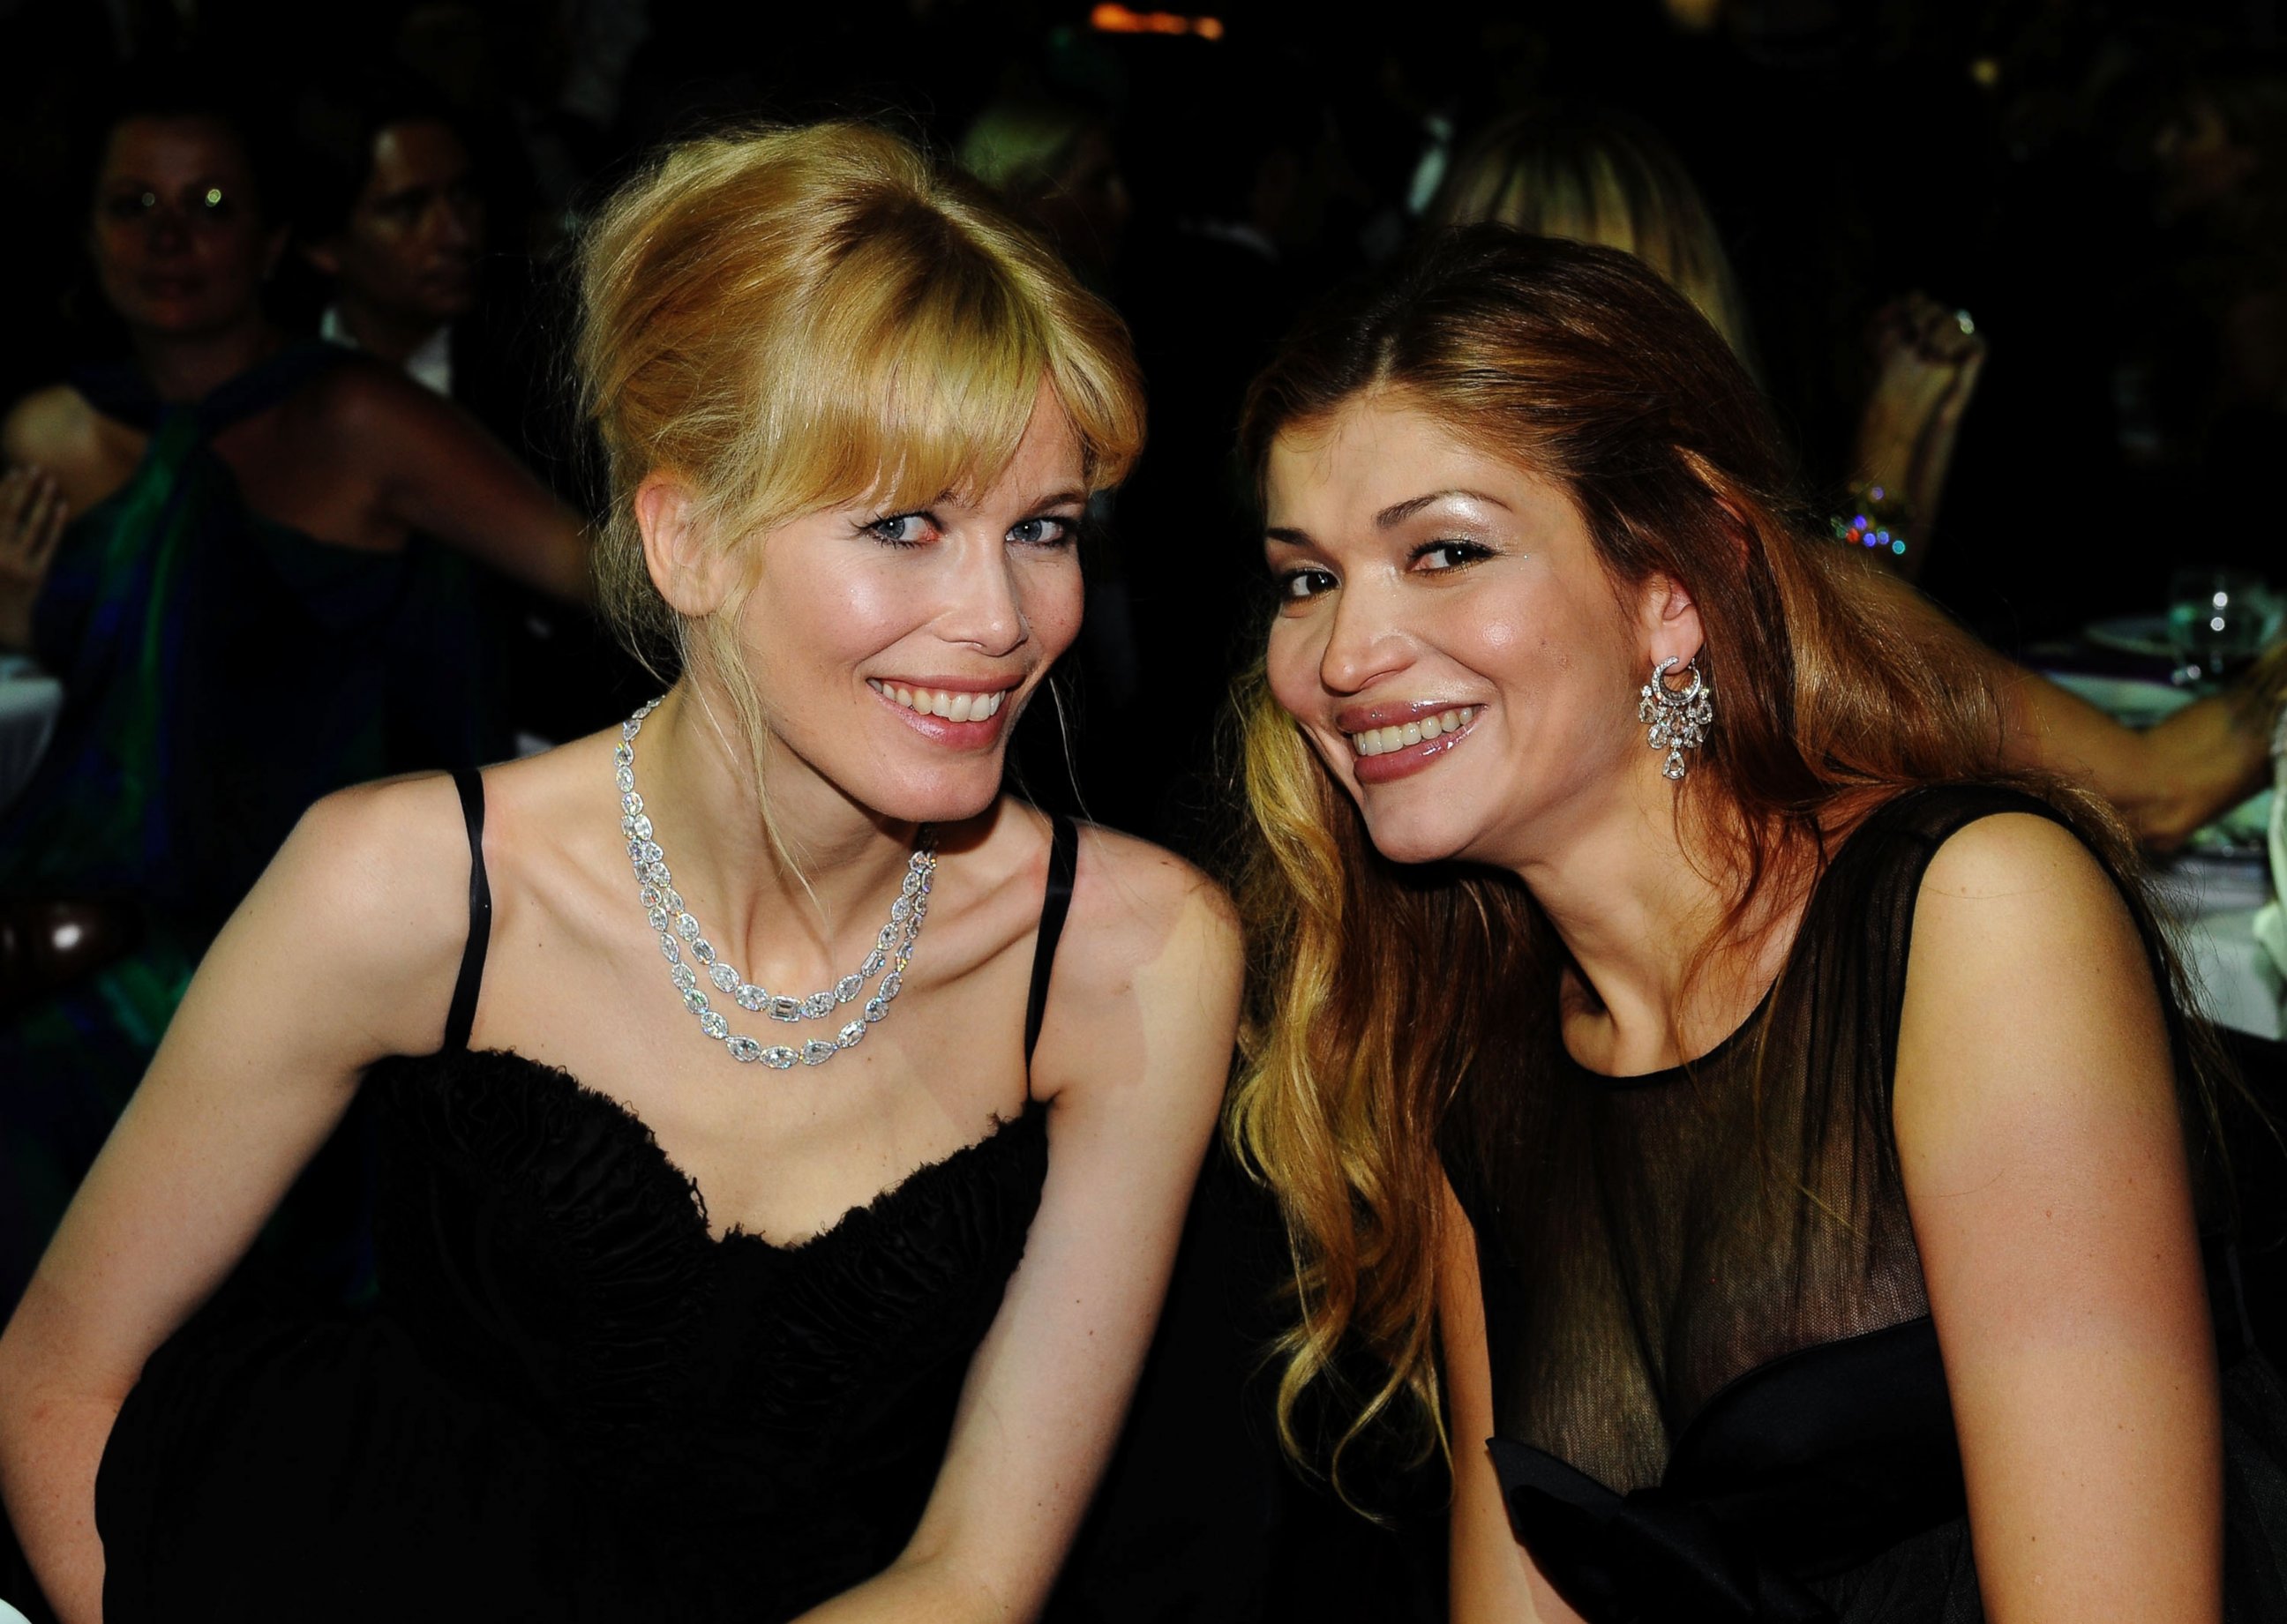 PHOTO: Claudia Schiffer and Gulnora Karimova attend the amfAR Cinema Against AIDS 2009 dinner at the Hotel du Cap during the 62nd Annual Cannes Film Festival on May 21, 2009 in Antibes, France.